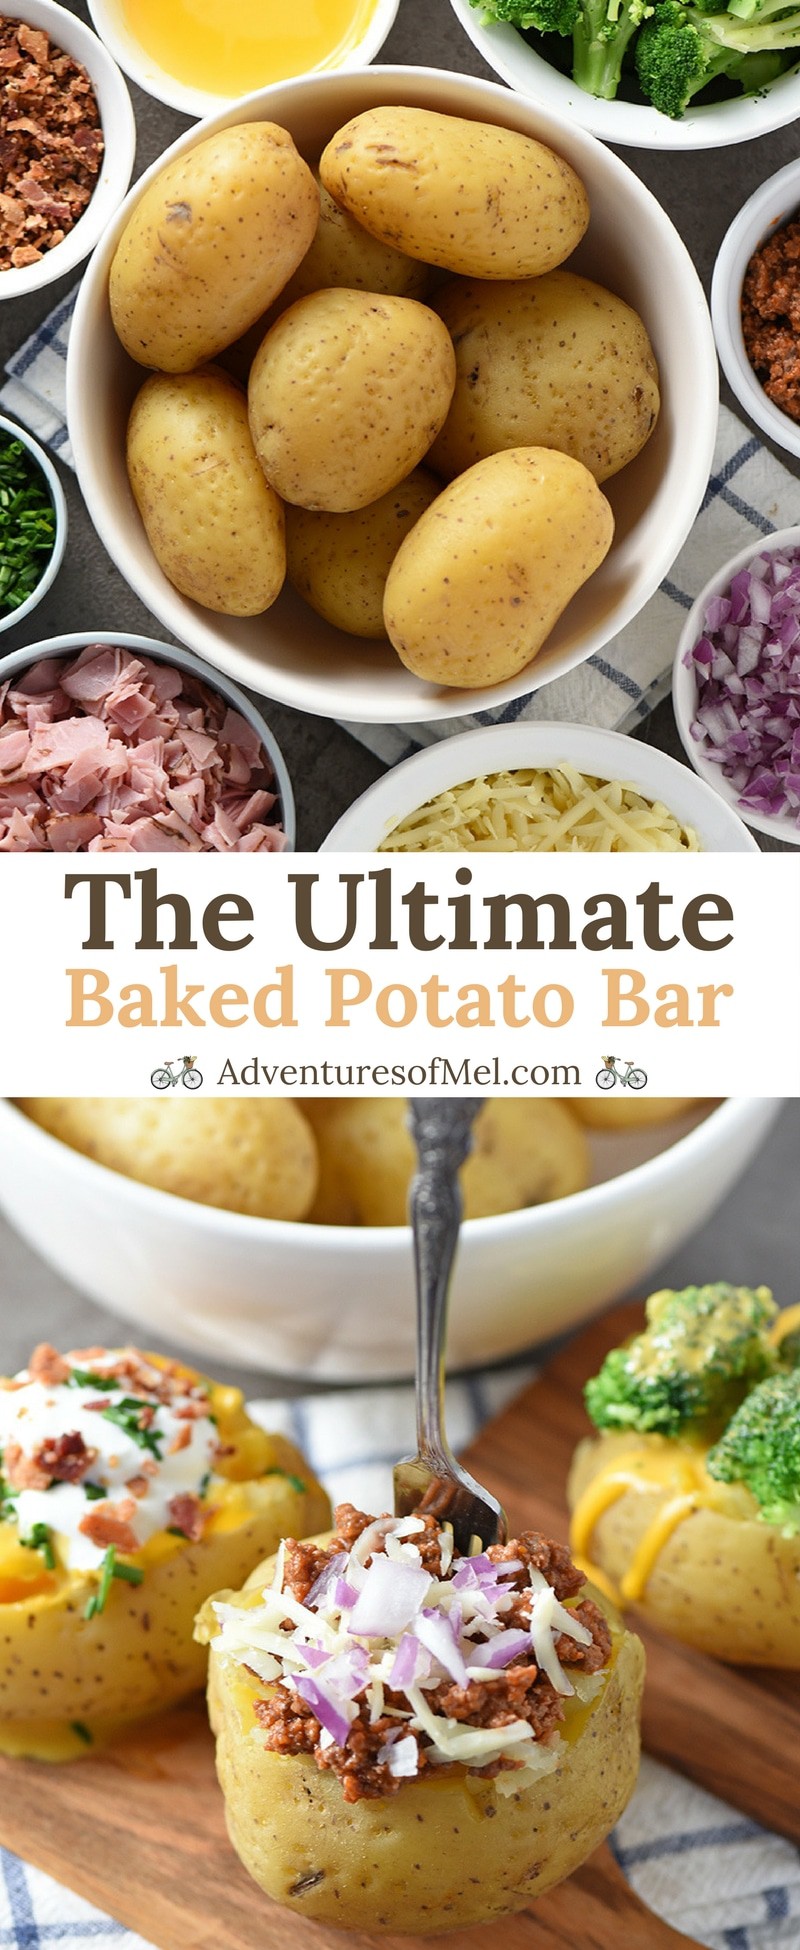 Baked Potato Bar ideas for your next party, family get together, or potluck. There's nothing quite like a baked potato loaded with delicious toppings. Get creative and have a little fun choosing all the fixings for your own baked potato buffet.